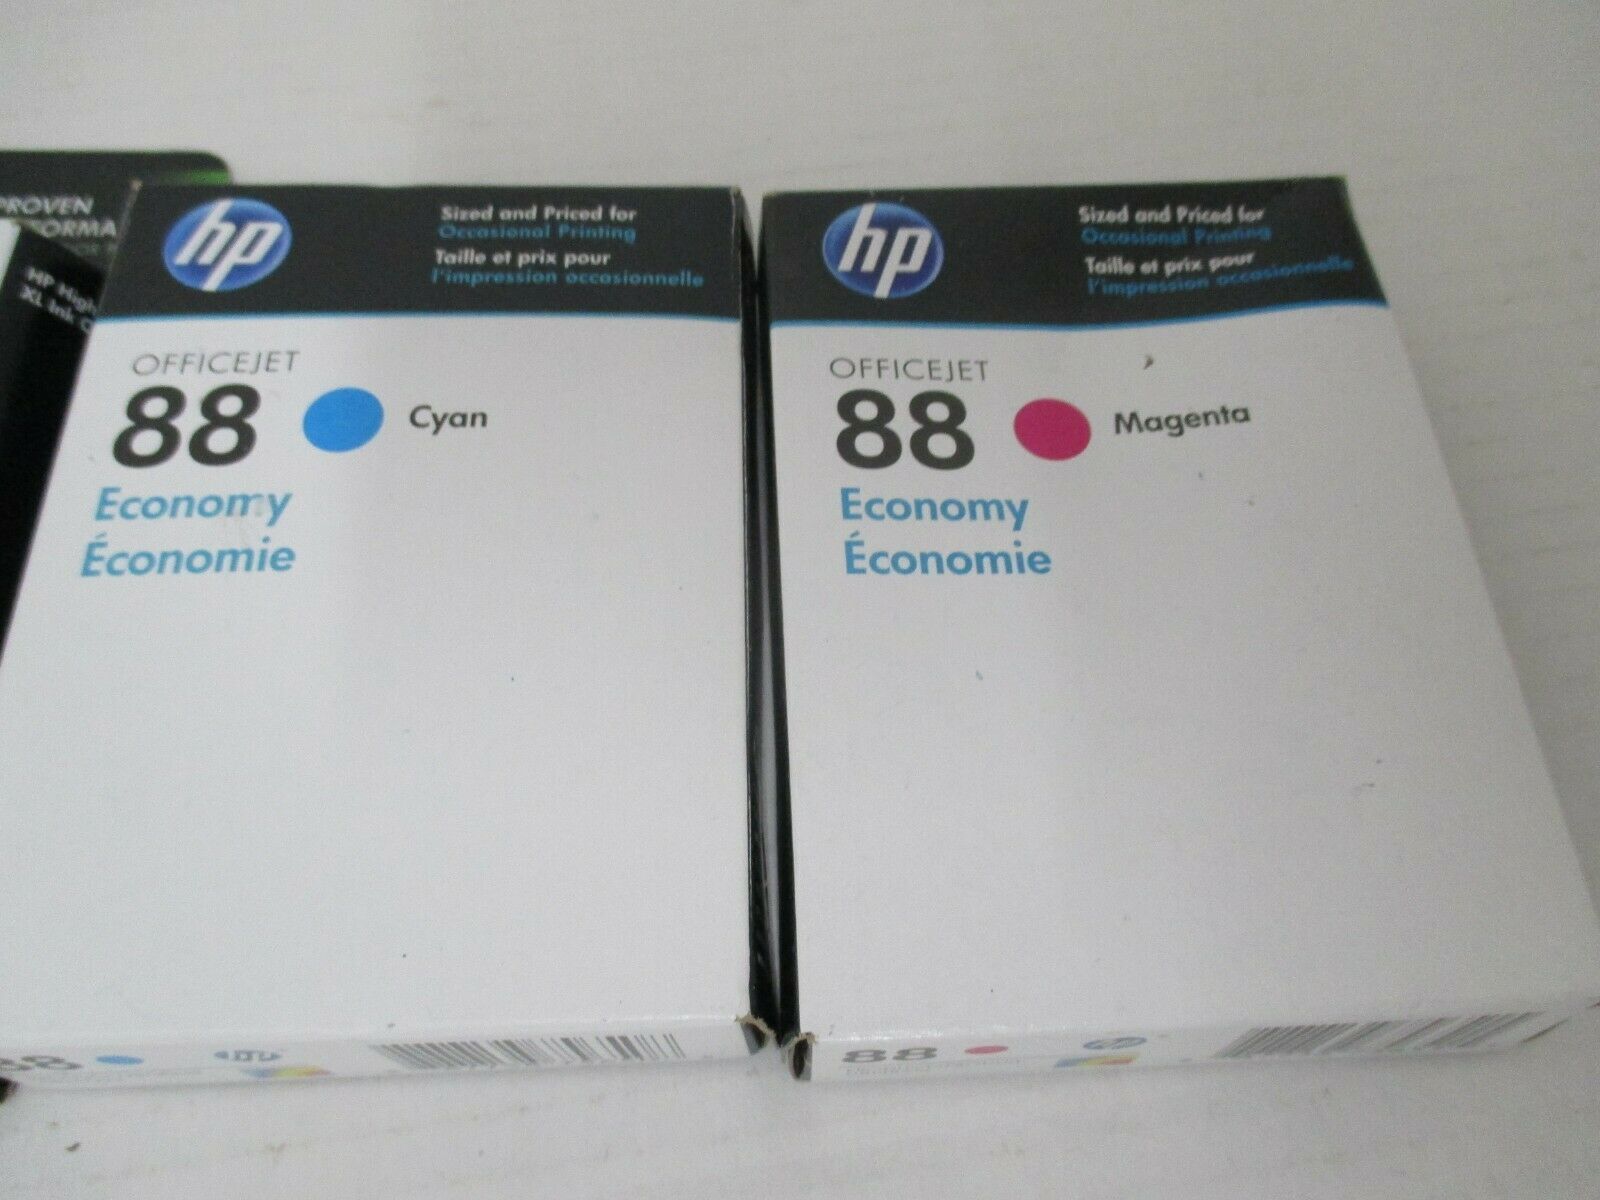 Primary image for HP 88XL Ink Cartridge Magenta (EXP: 2/15) Lot of 3 Economy 88 Cyan & Magenta NEW